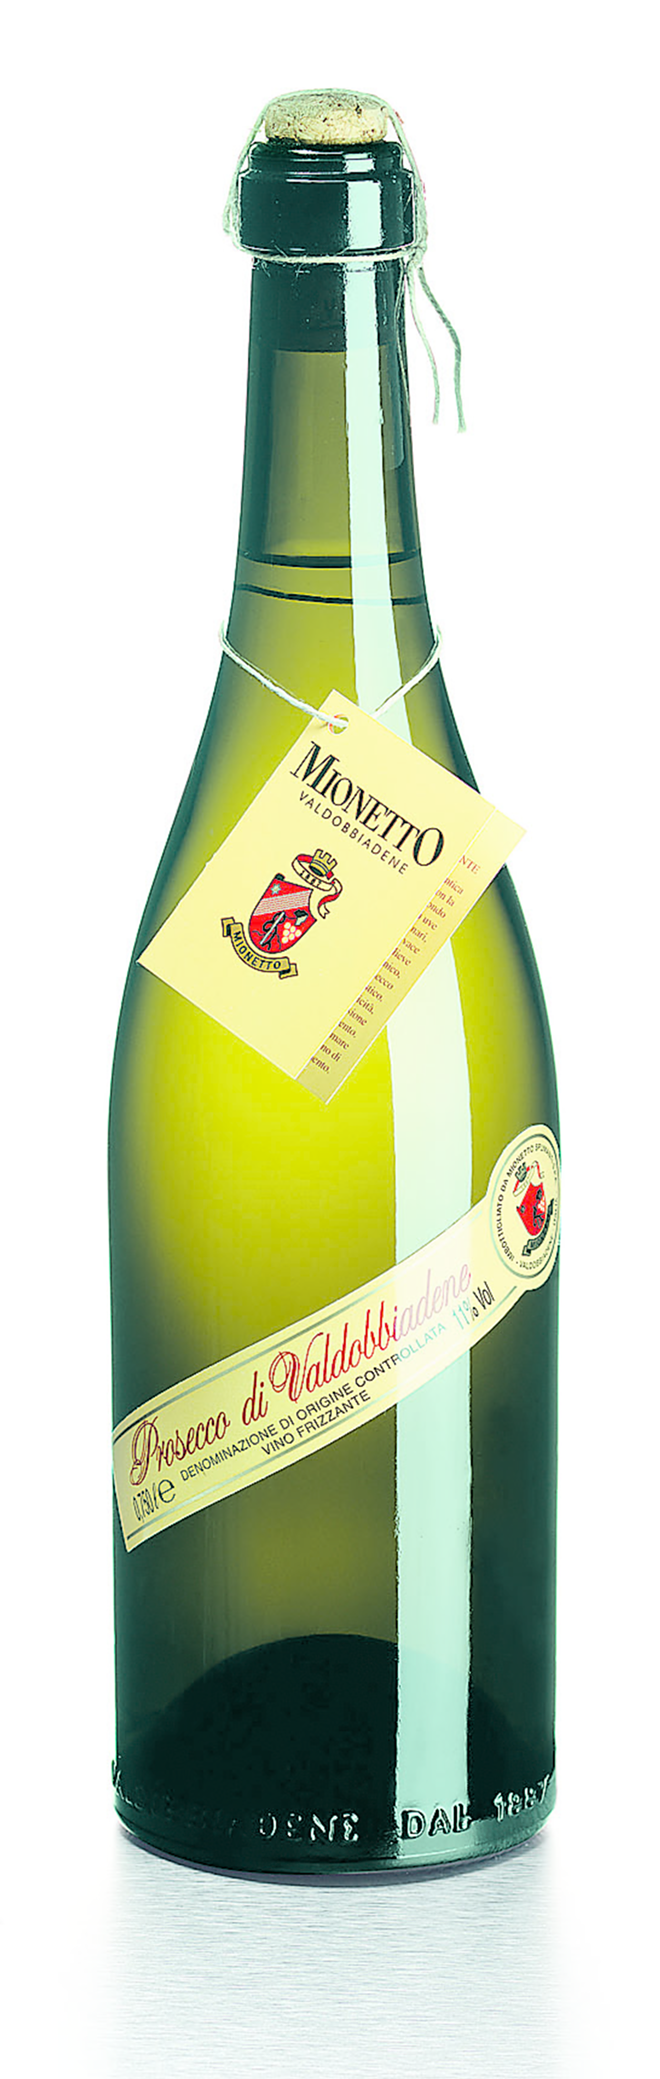 GET YOUR FIZZ ON: Good prosecco runs under $20 a bottle. You’d be lucky to get a half-bottle of Champage for that price. - Mionetto